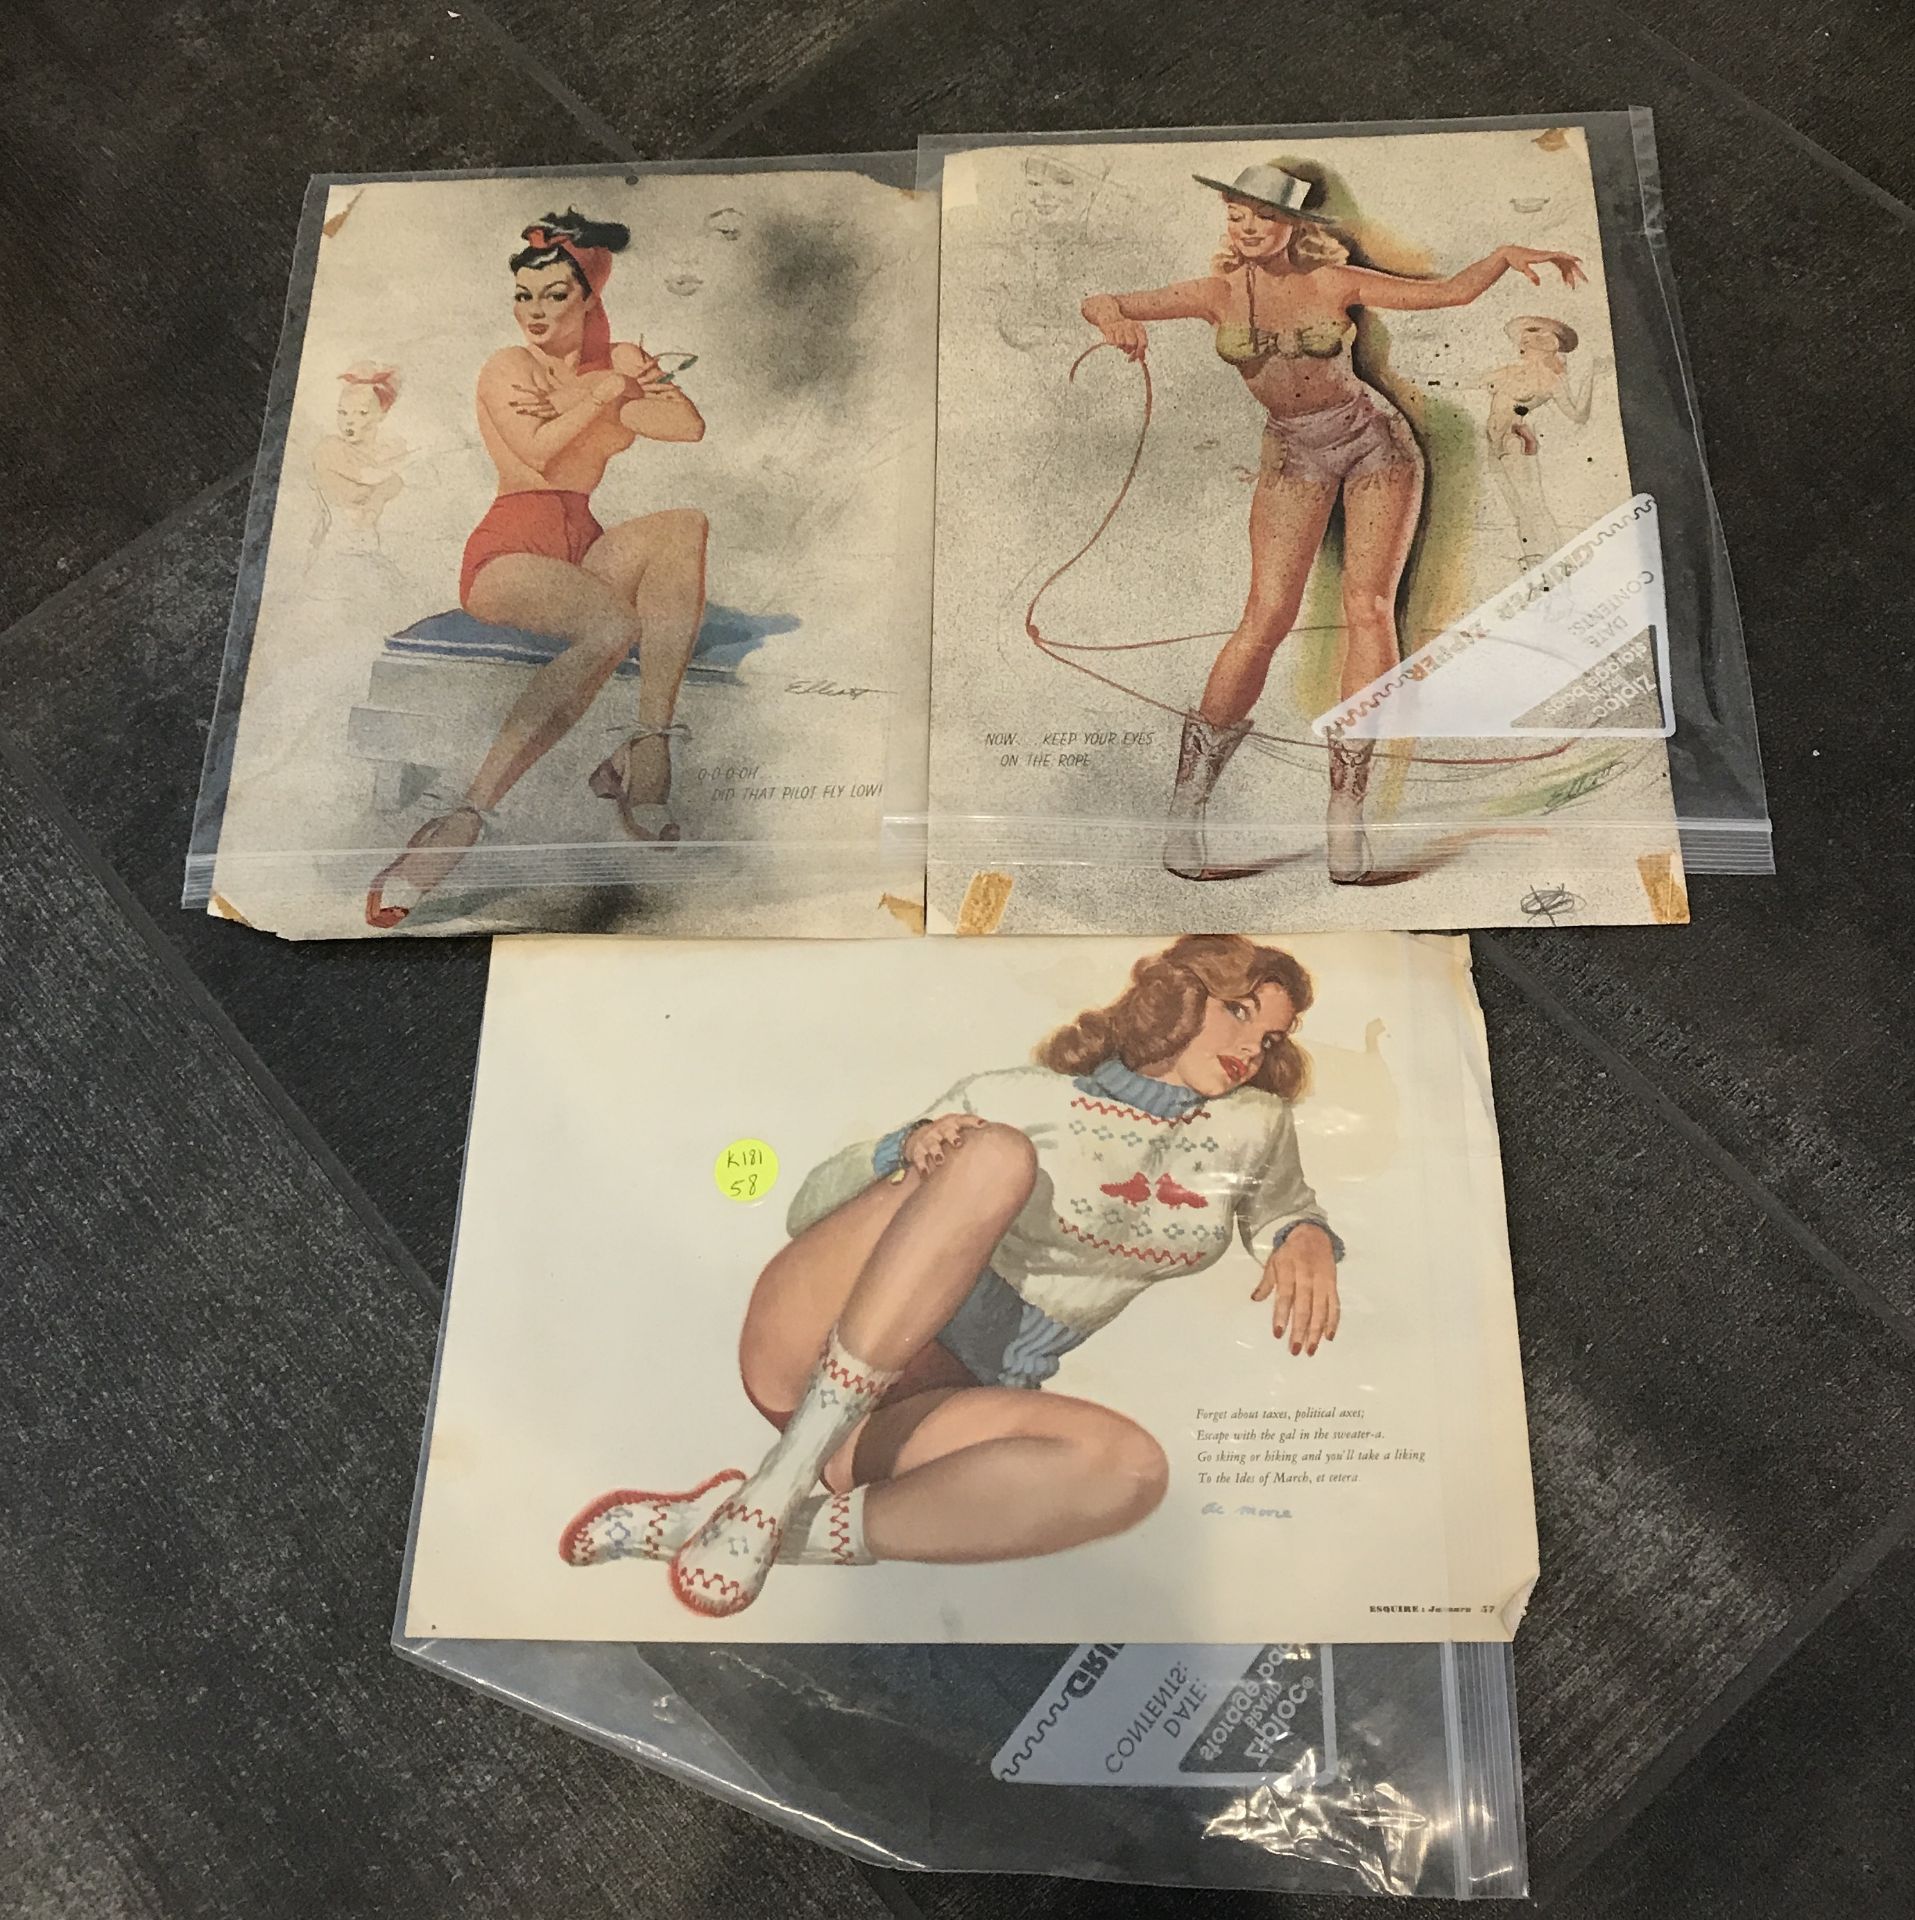 3 VINTAGE PIN UP ART PAGES BY AL MOORE. - Image 2 of 2